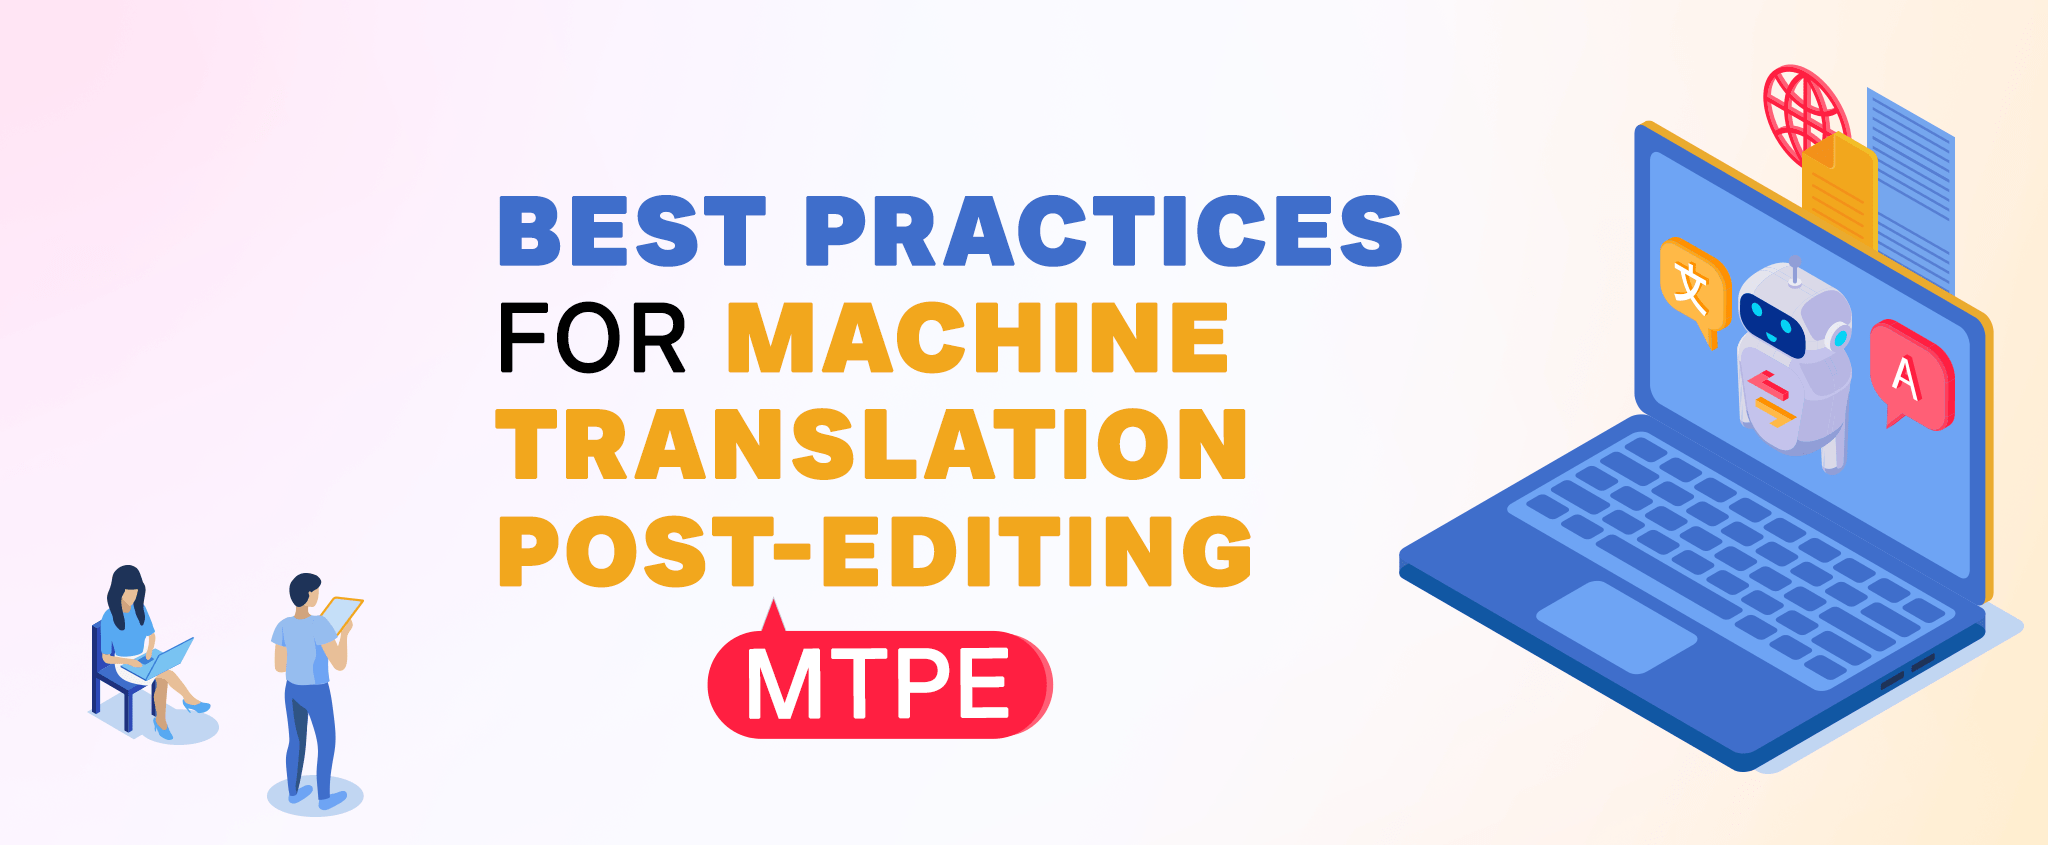 Best Practices for Machine Translation Post-Editing (MTPE)